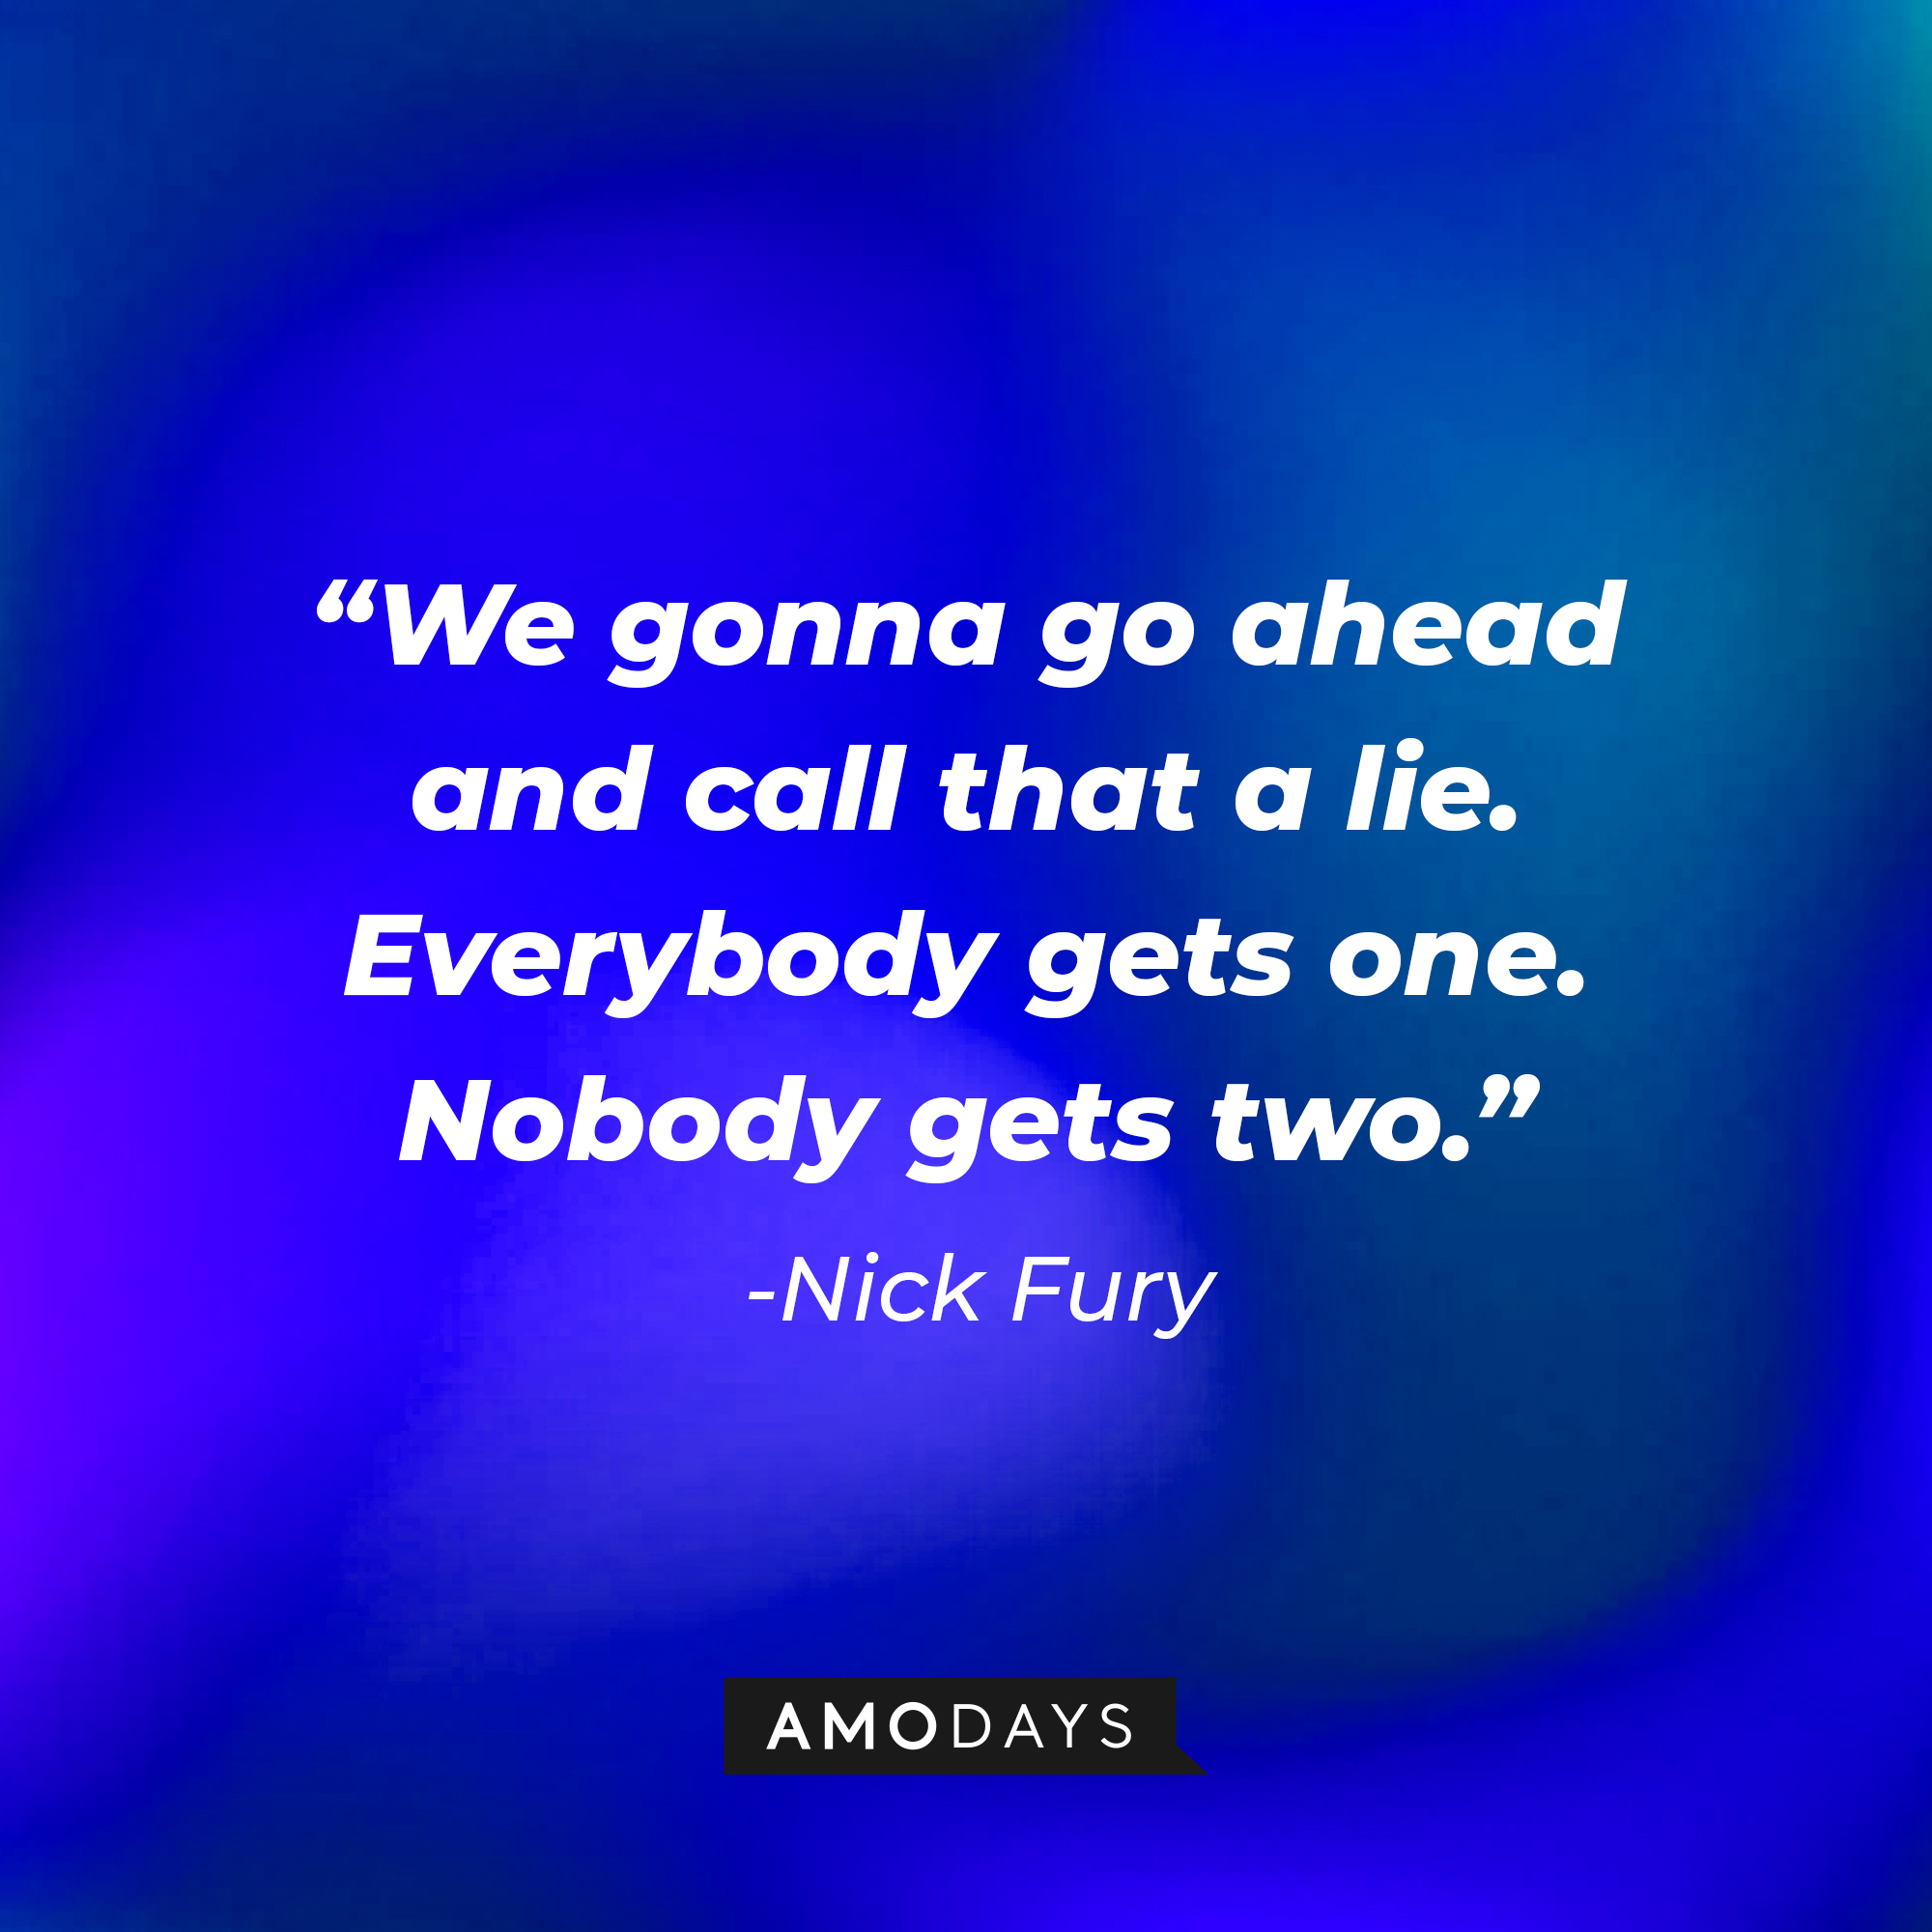 Nick Fury's quote: "We gonna go ahead and call that a lie. Everybody gets one. Nobody gets two." | Source: AmoDays